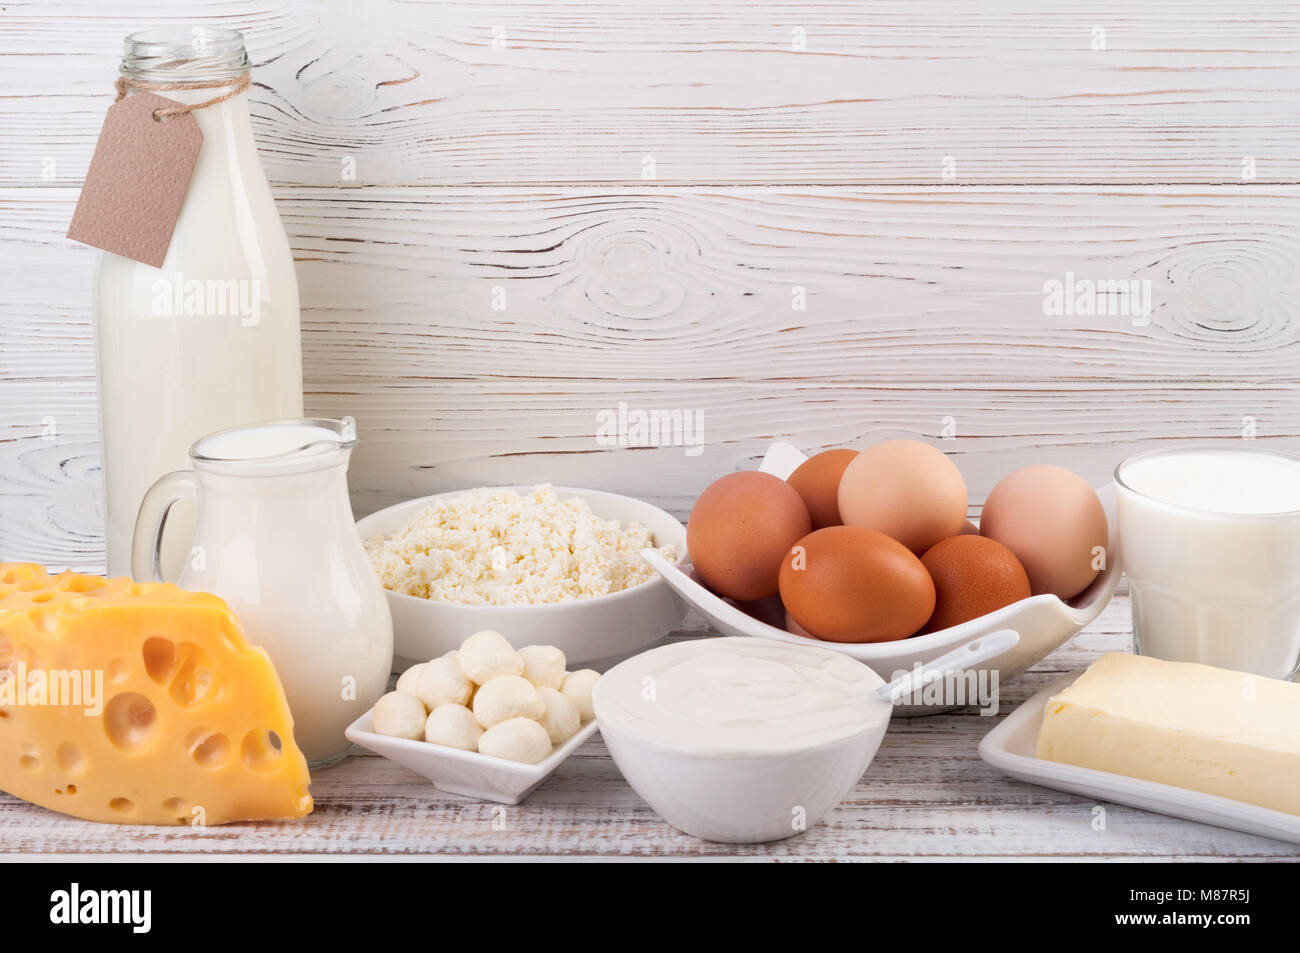 Dairy products on wooden table. Milk, sour cream, cheese, egg, yogurt and butter. Healthy eating and diet concept. Copy space Stock Photo